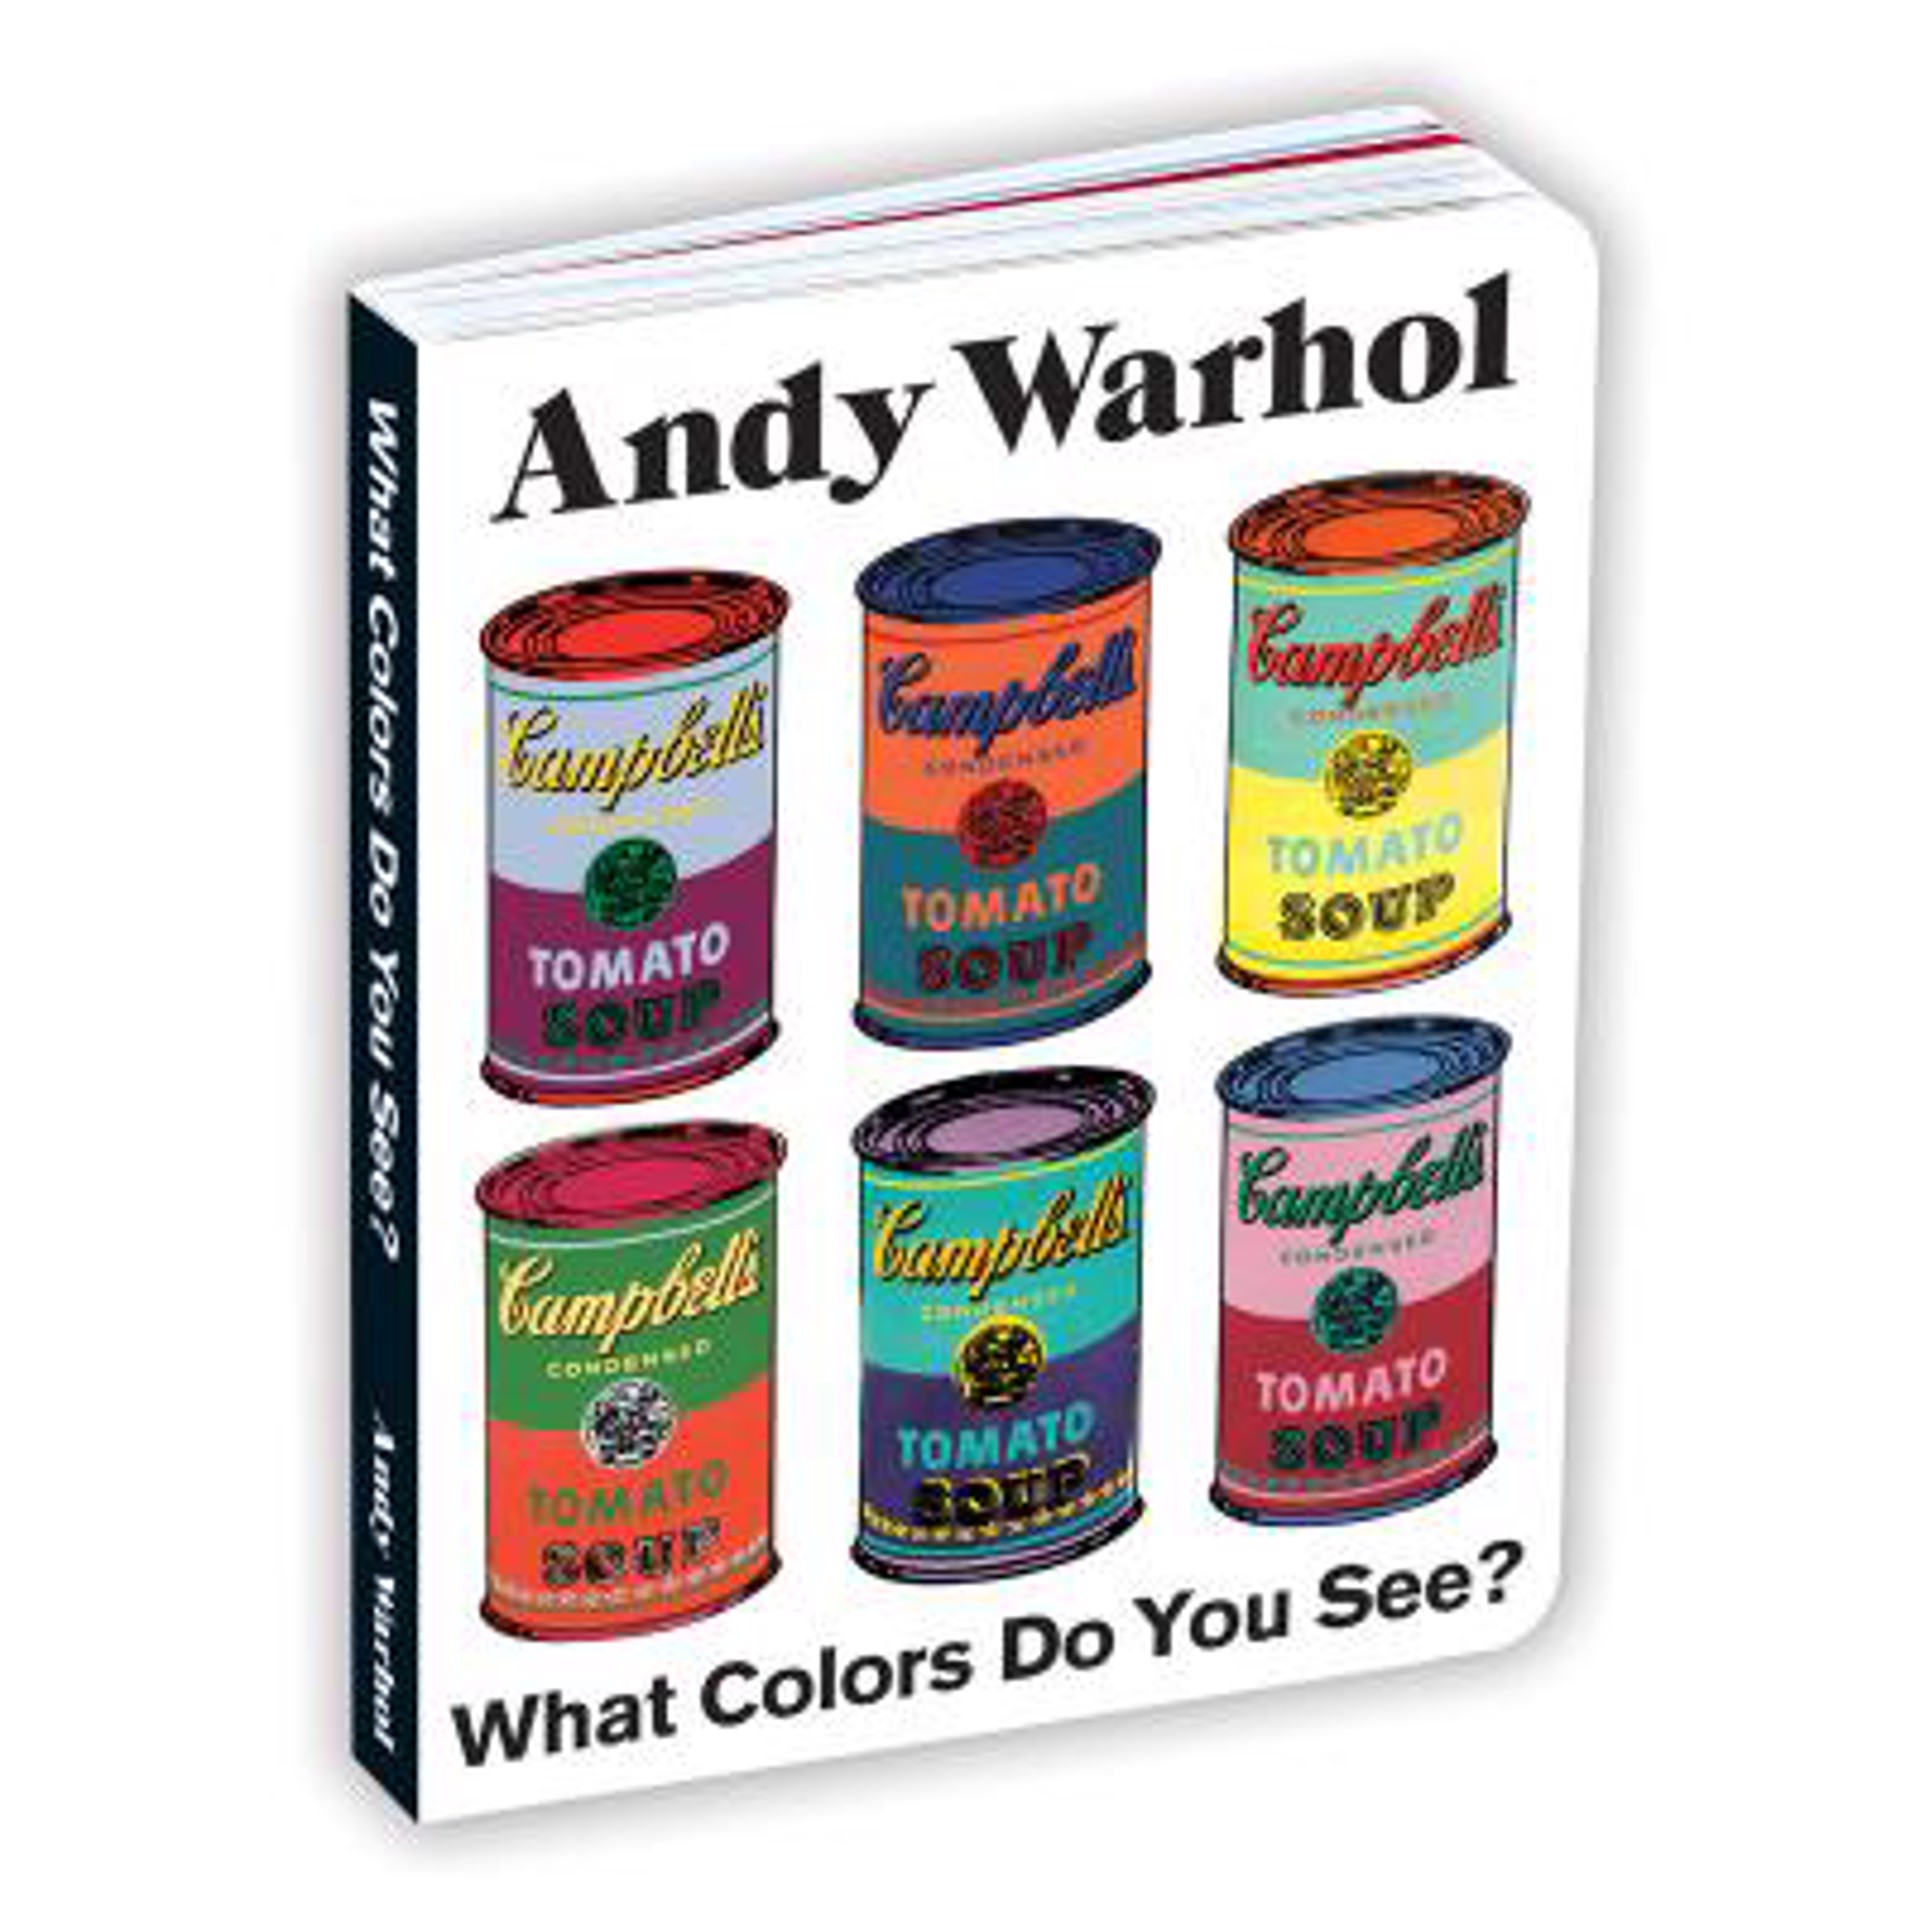 What Colors Do You See? by Andy Warhol